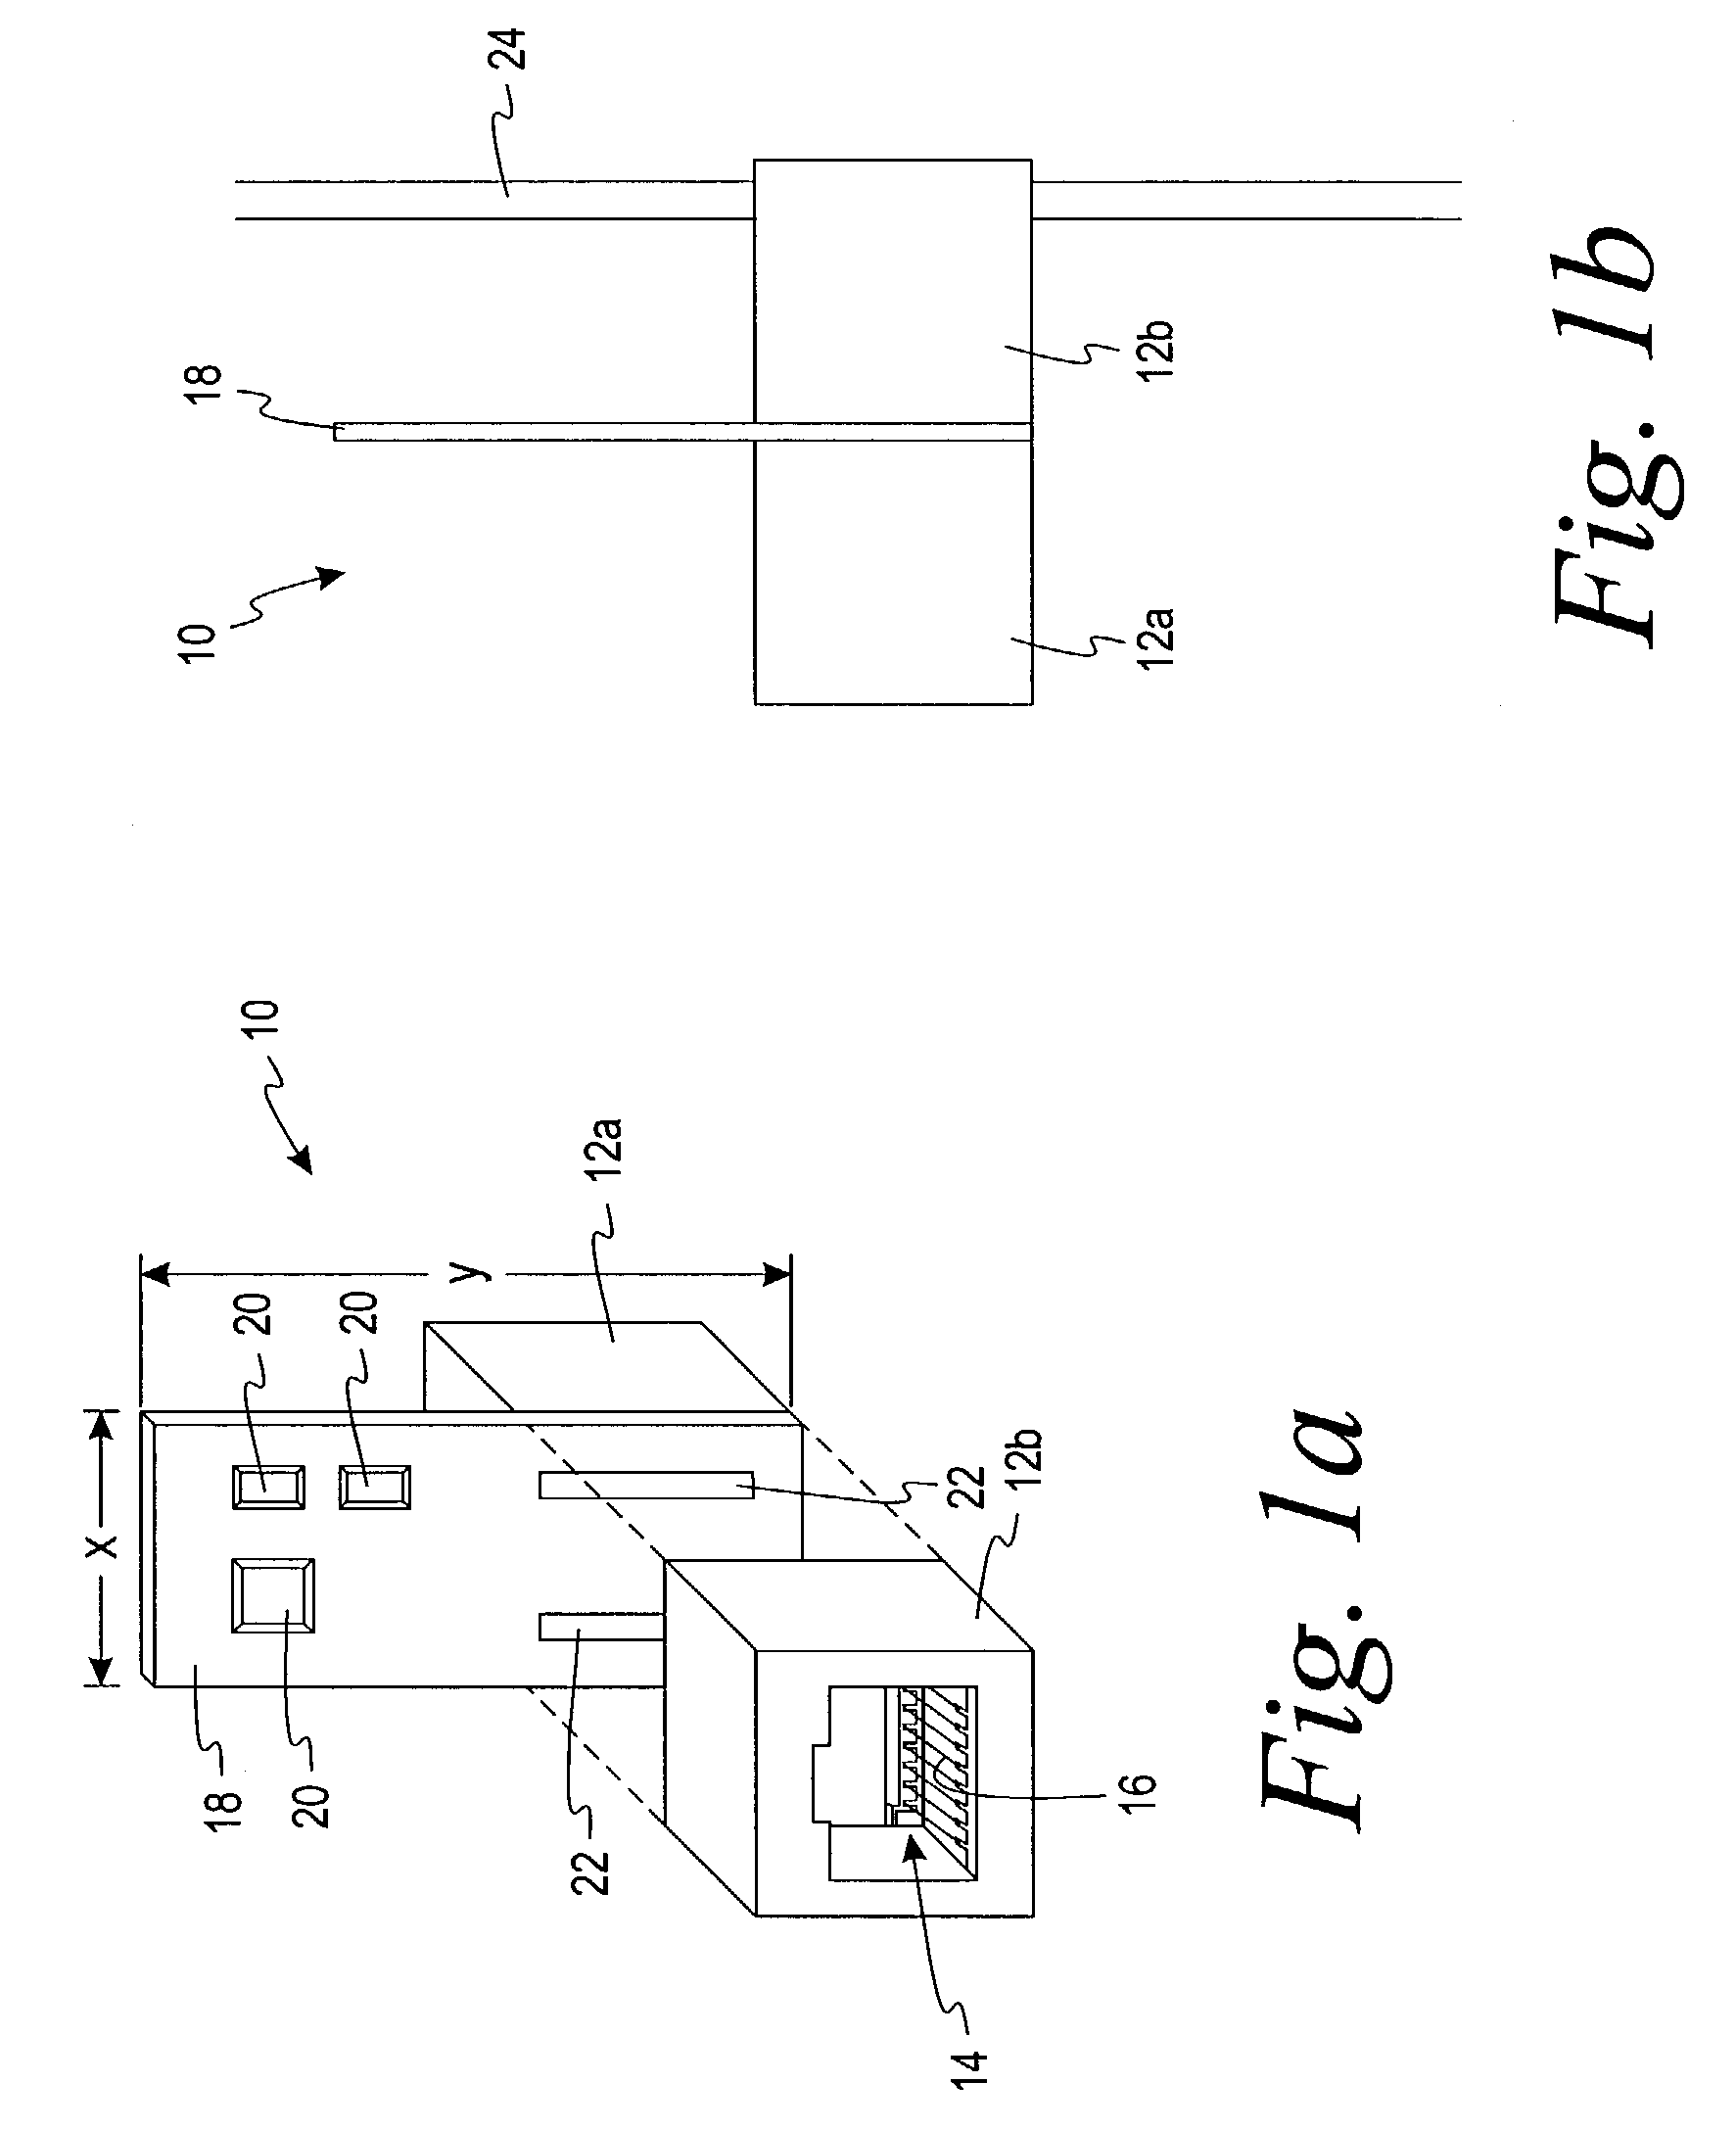 Systems and methods for managing a network